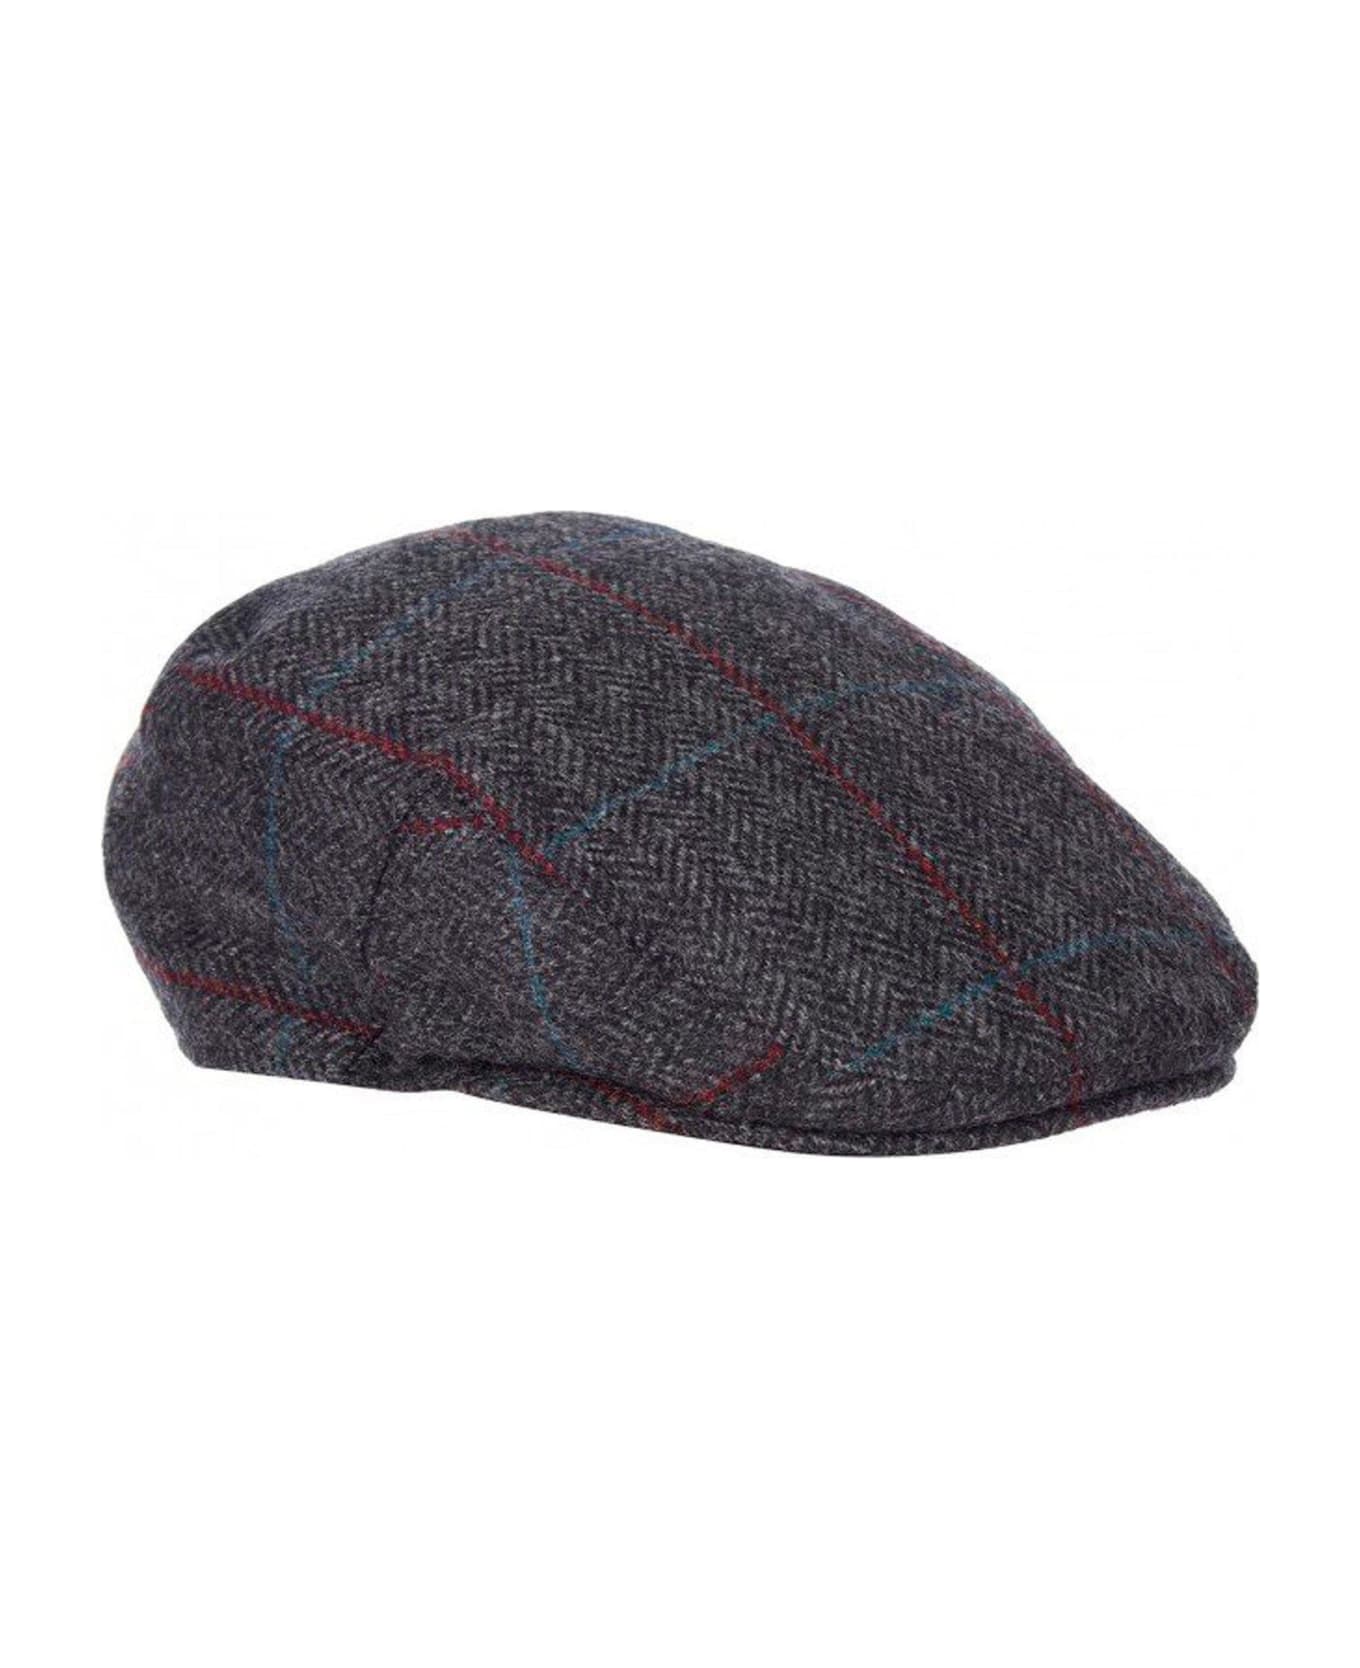 Barbour Crieff Flat Cap - Charcoal/red/blue